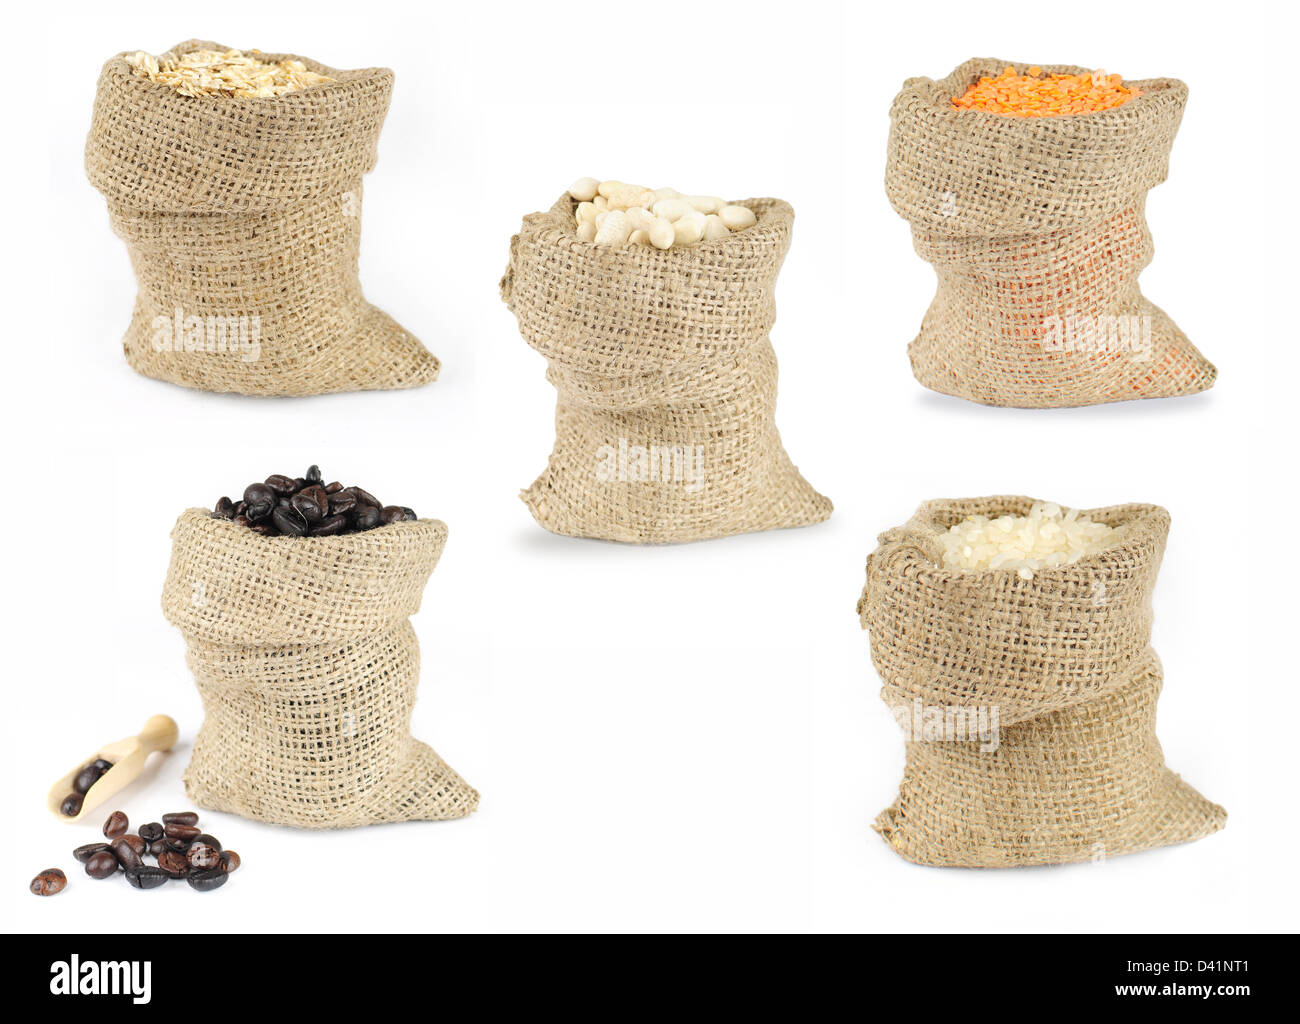 Selection of grains scattered from burlap bags on white background Stock Photo